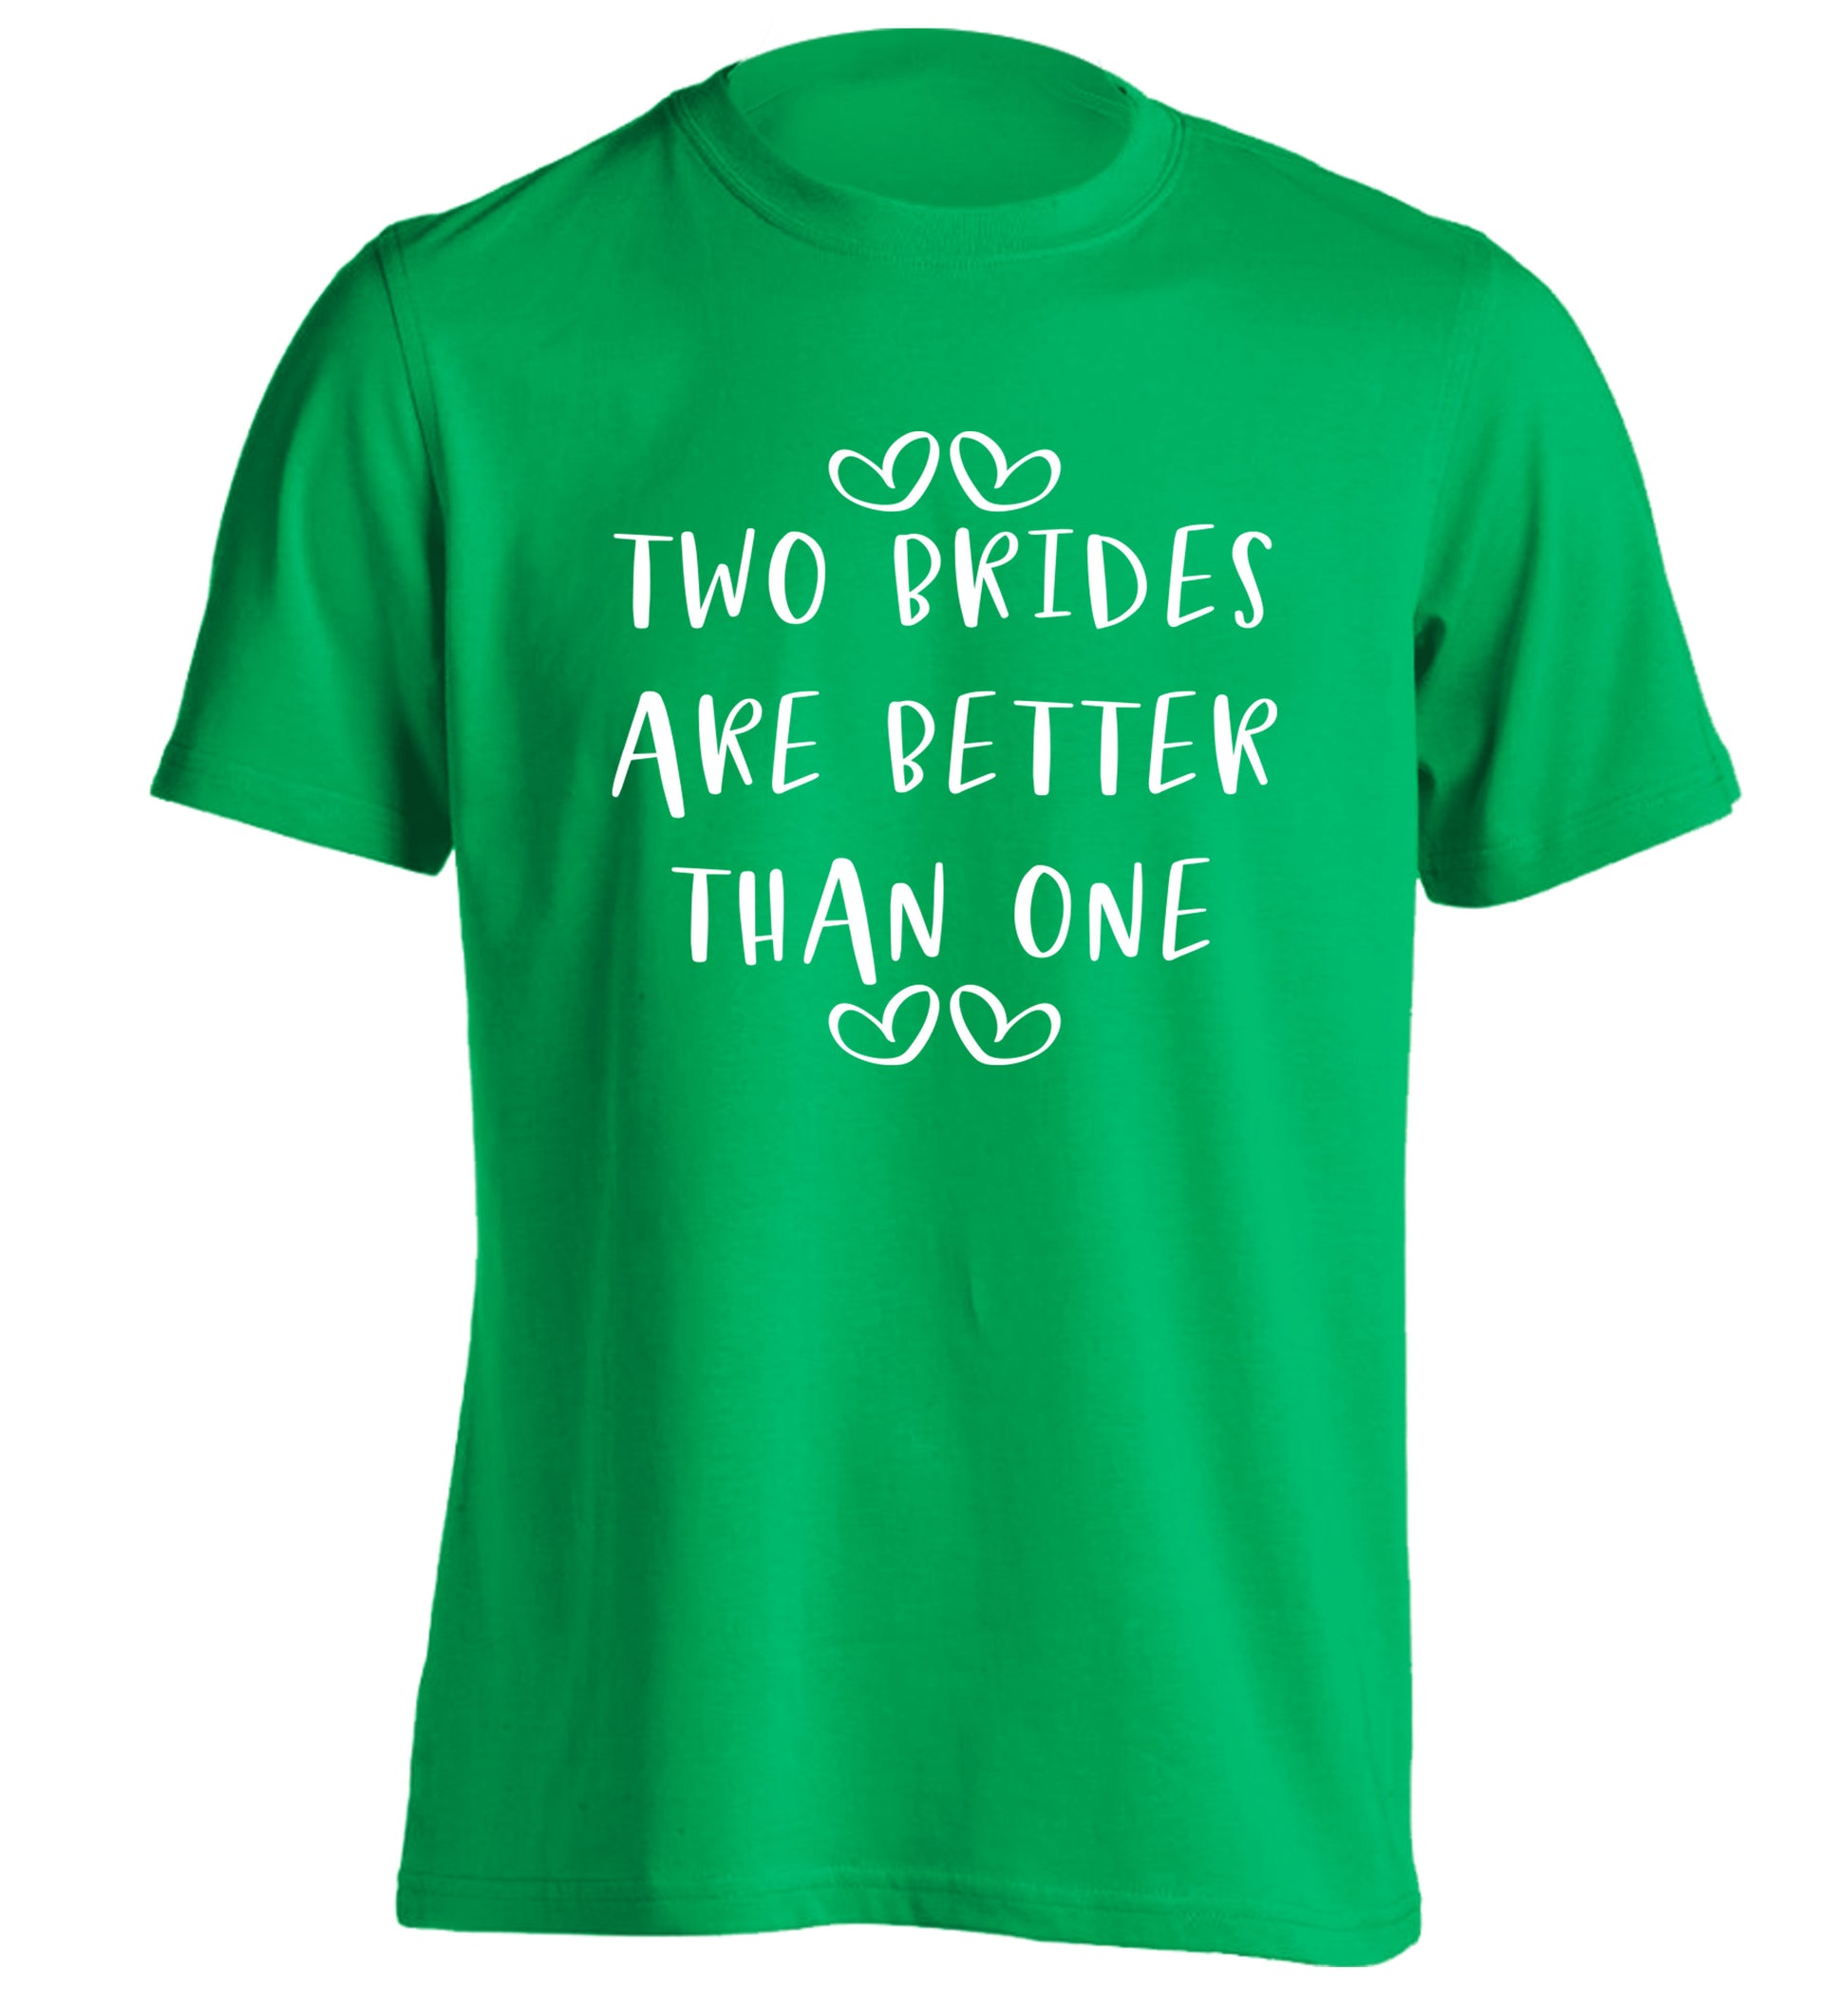 Two brides are better than one adults unisex green Tshirt 2XL